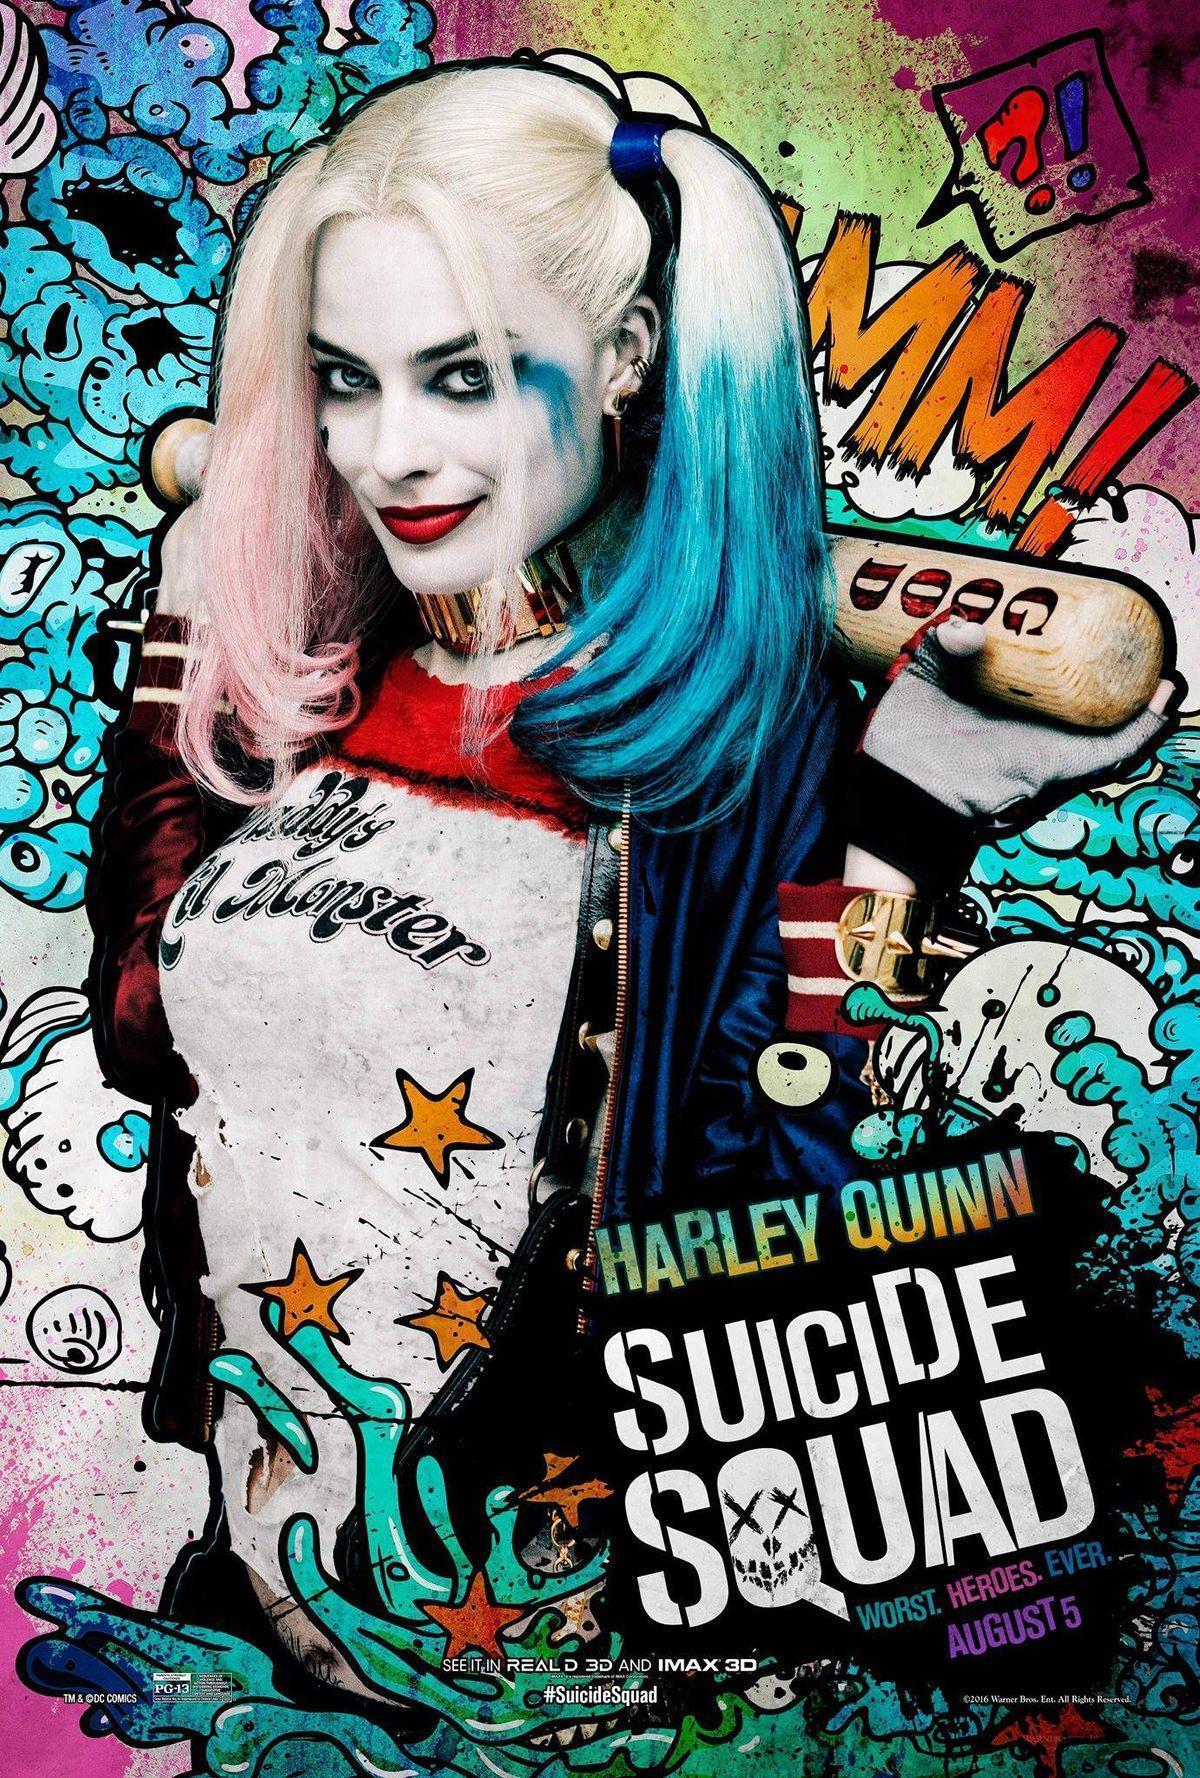 All Movie Posters and Prints for Suicide Squad